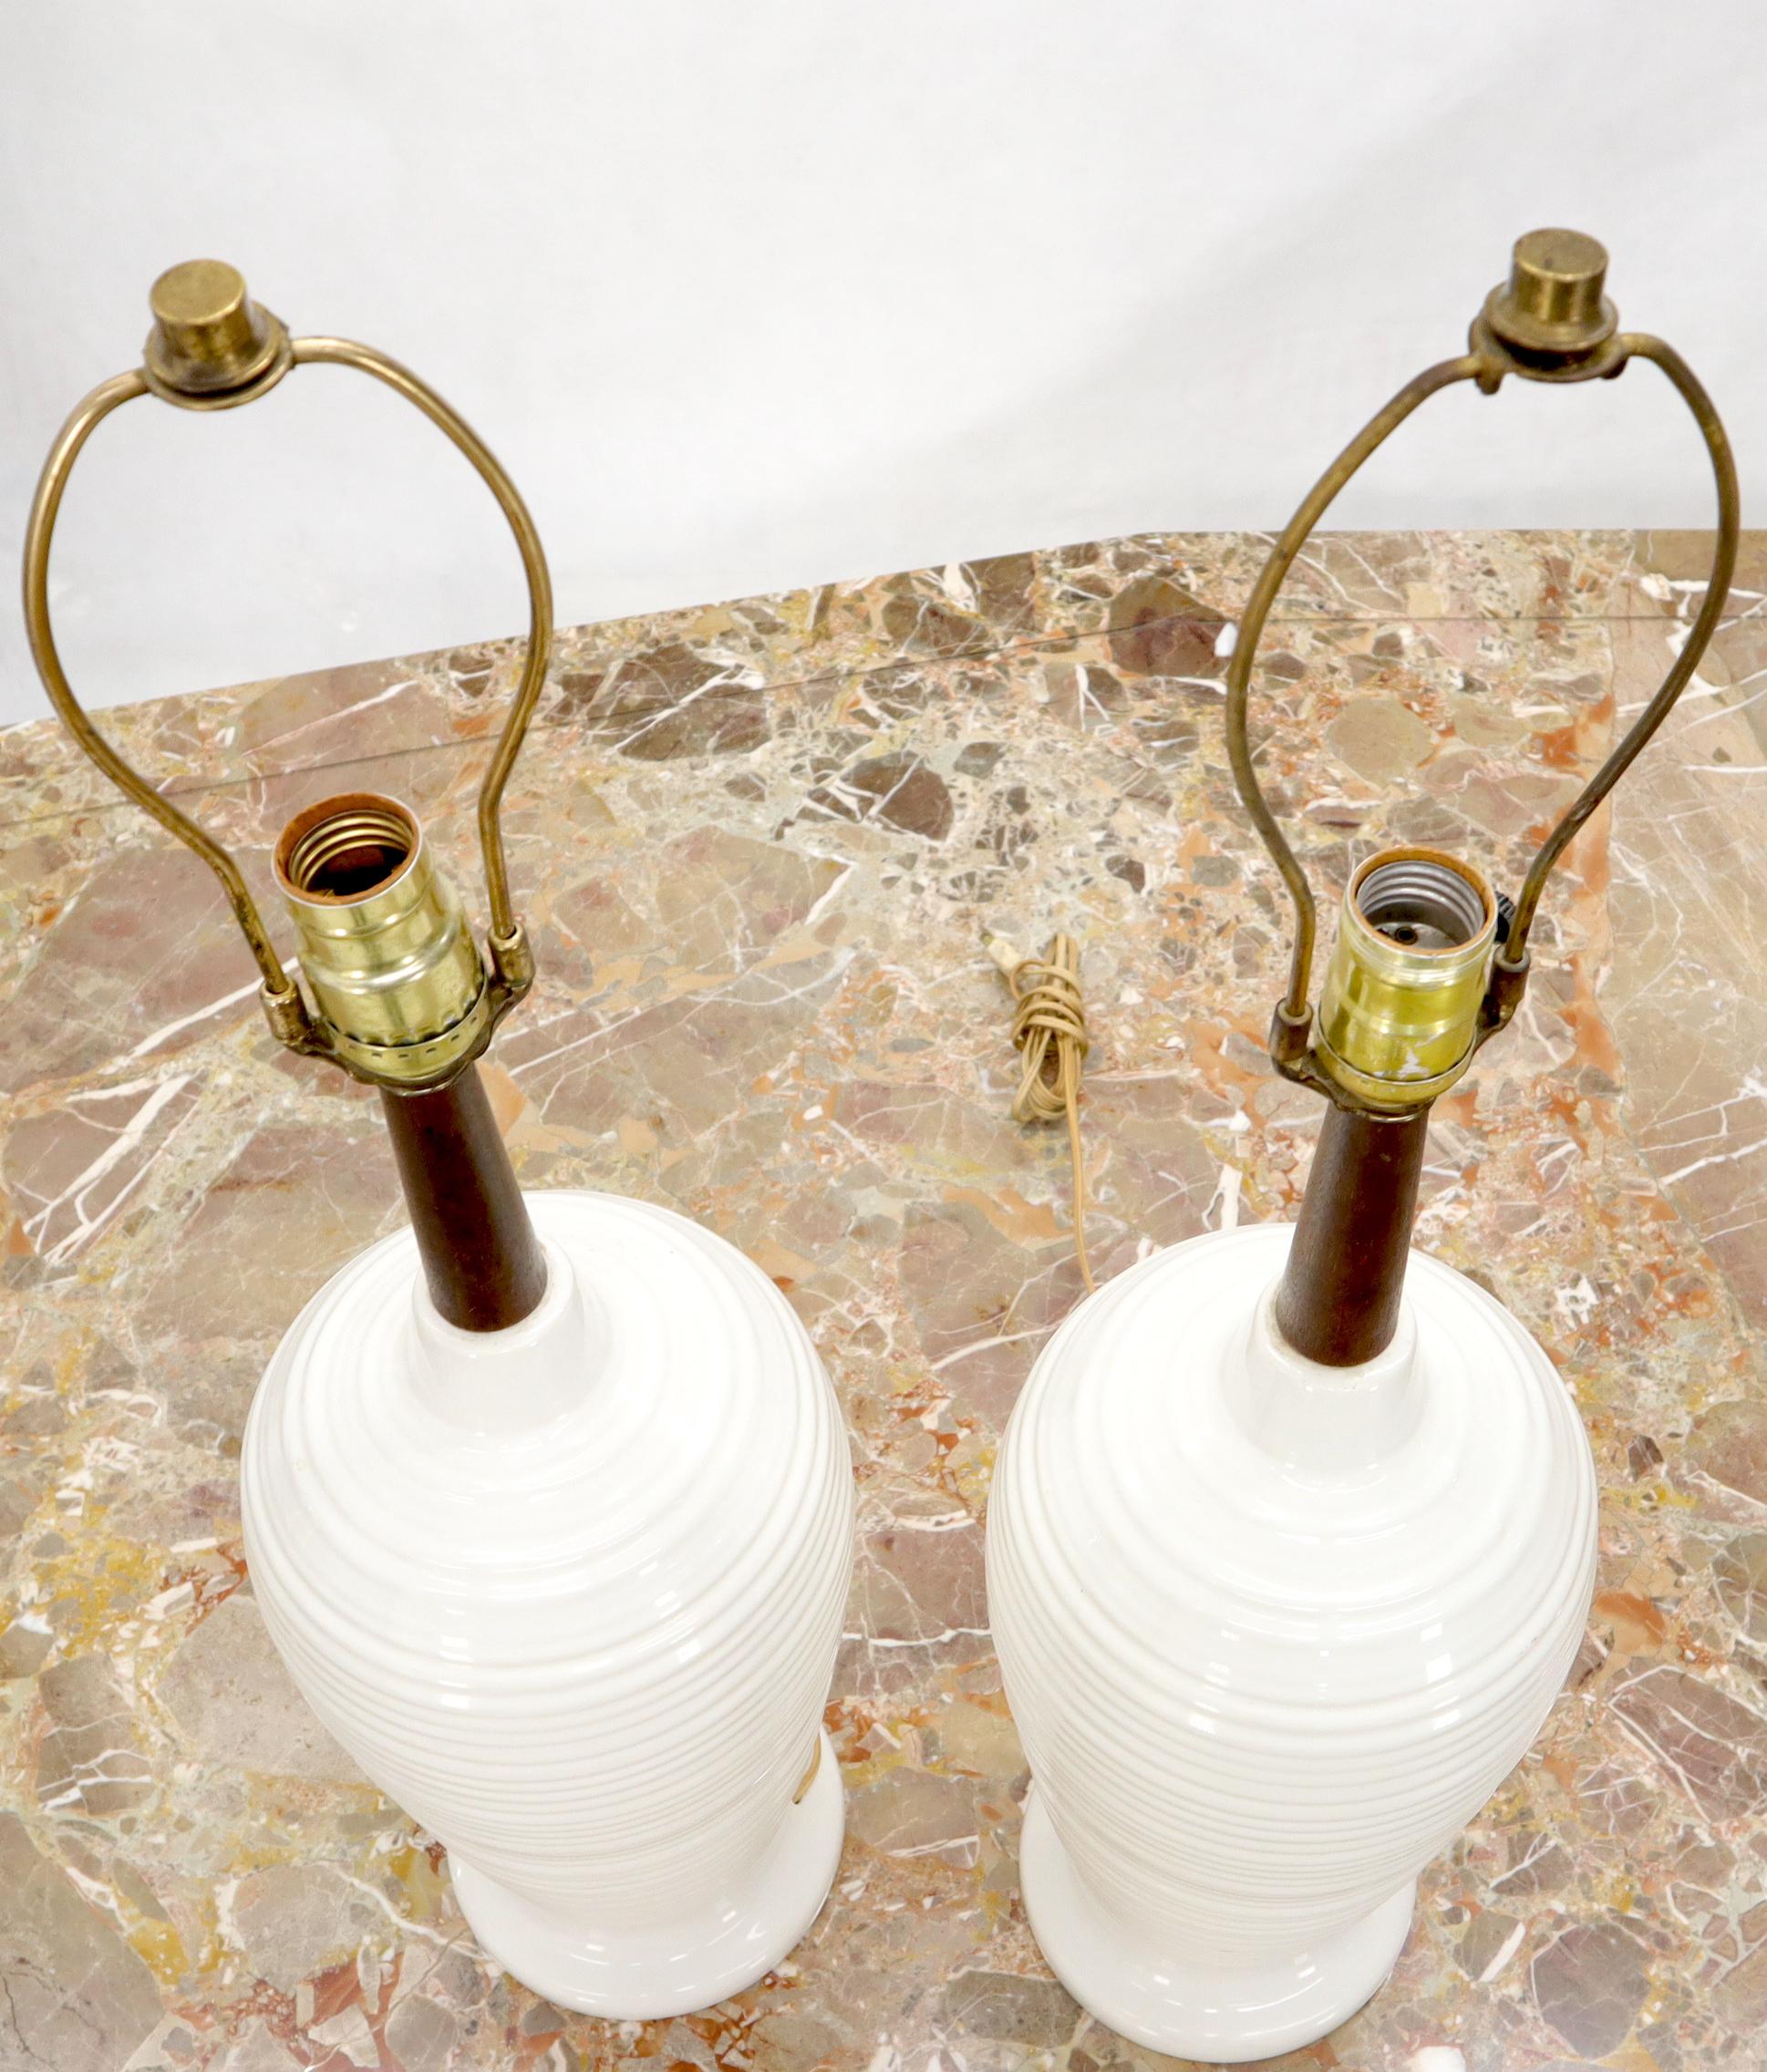 Pair of Vase Shape Glazed Ceramic Pottery Walnut Table Lamps In Good Condition For Sale In Rockaway, NJ